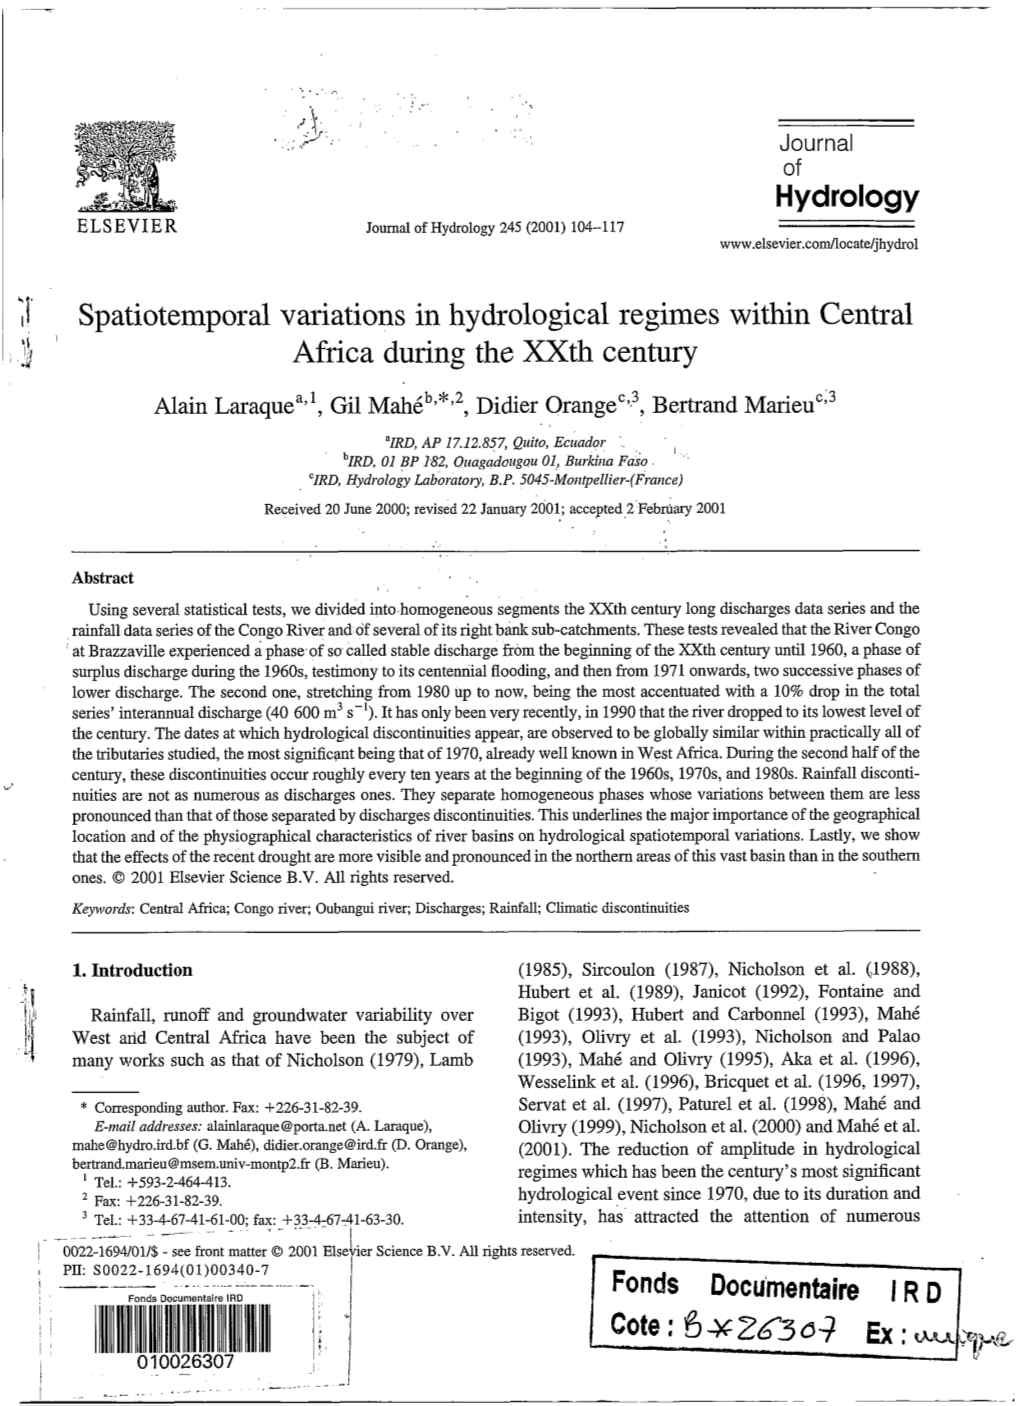 Spatiotemporal Variations in Hydrological Regimes Within Central Africa During the Xxth Century